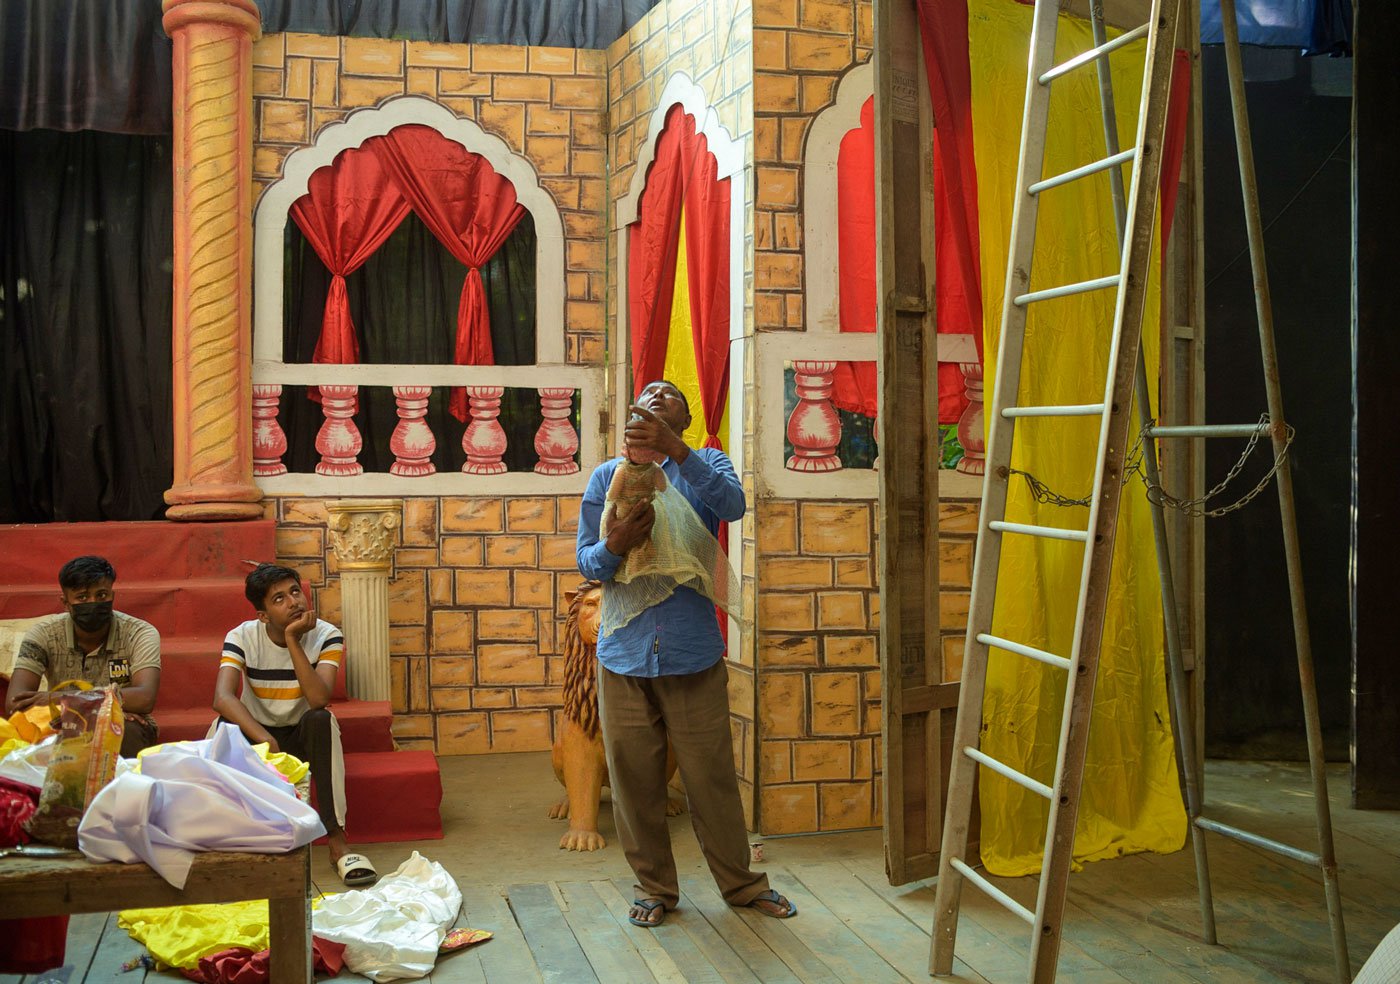 The Garamur Saru Satra is one of the more than 60 venues in Majuli, Assam where the mahotsav was held in 2022. Krishna Dutta, (standing) works on stage decorations